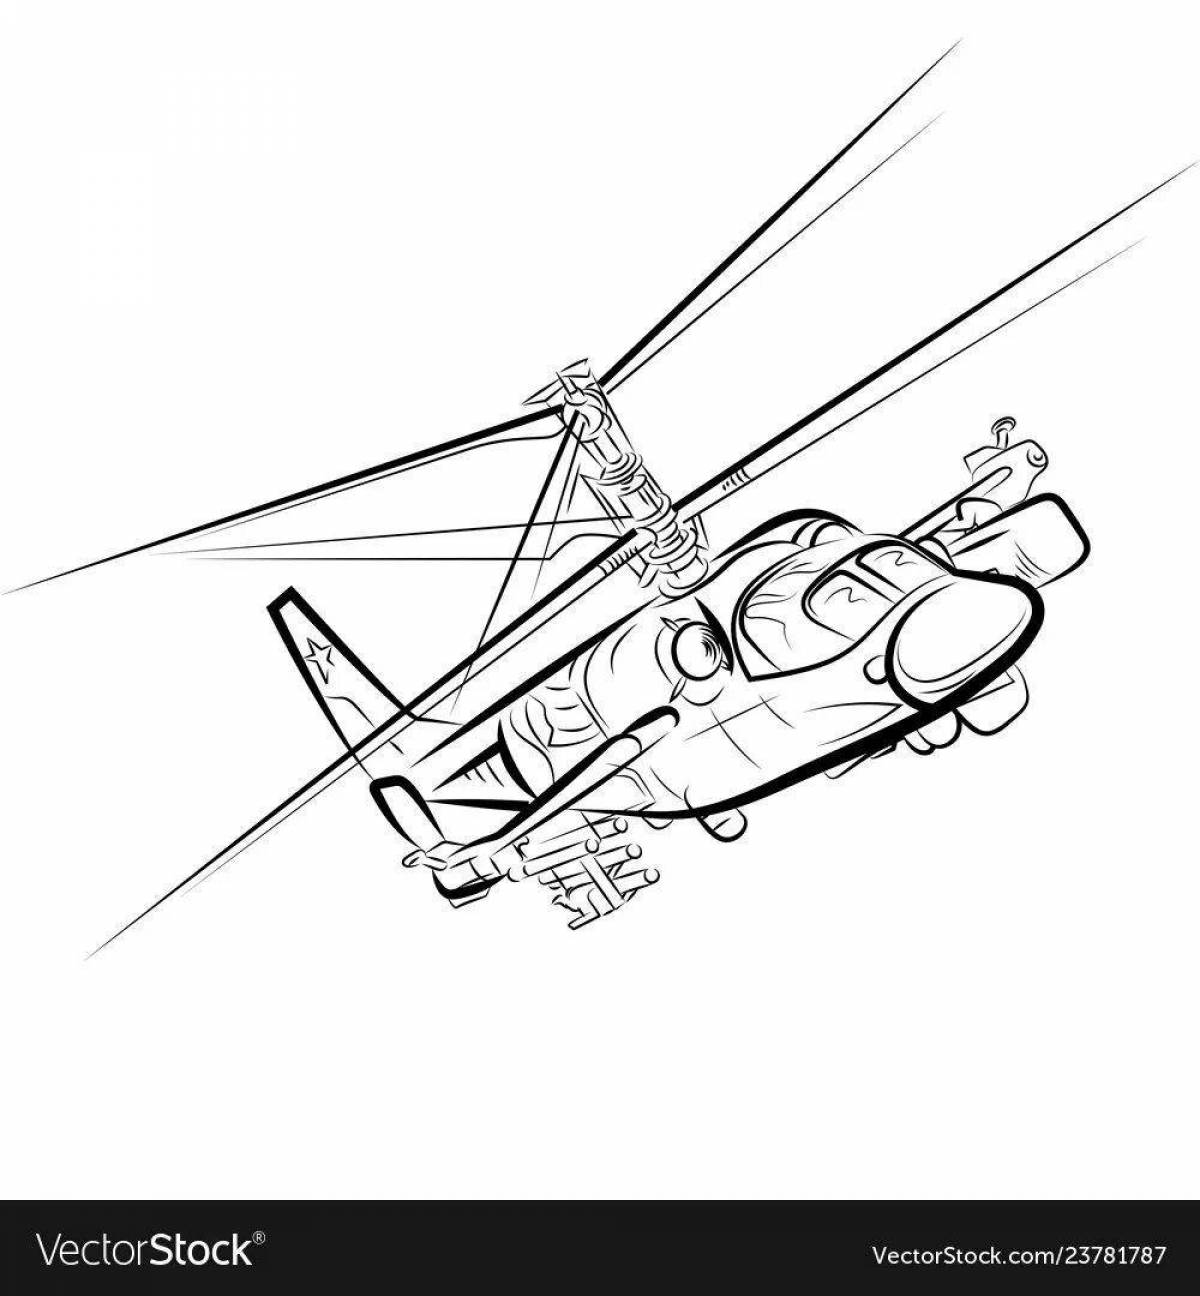 Exciting coloring of helicopter mi 26